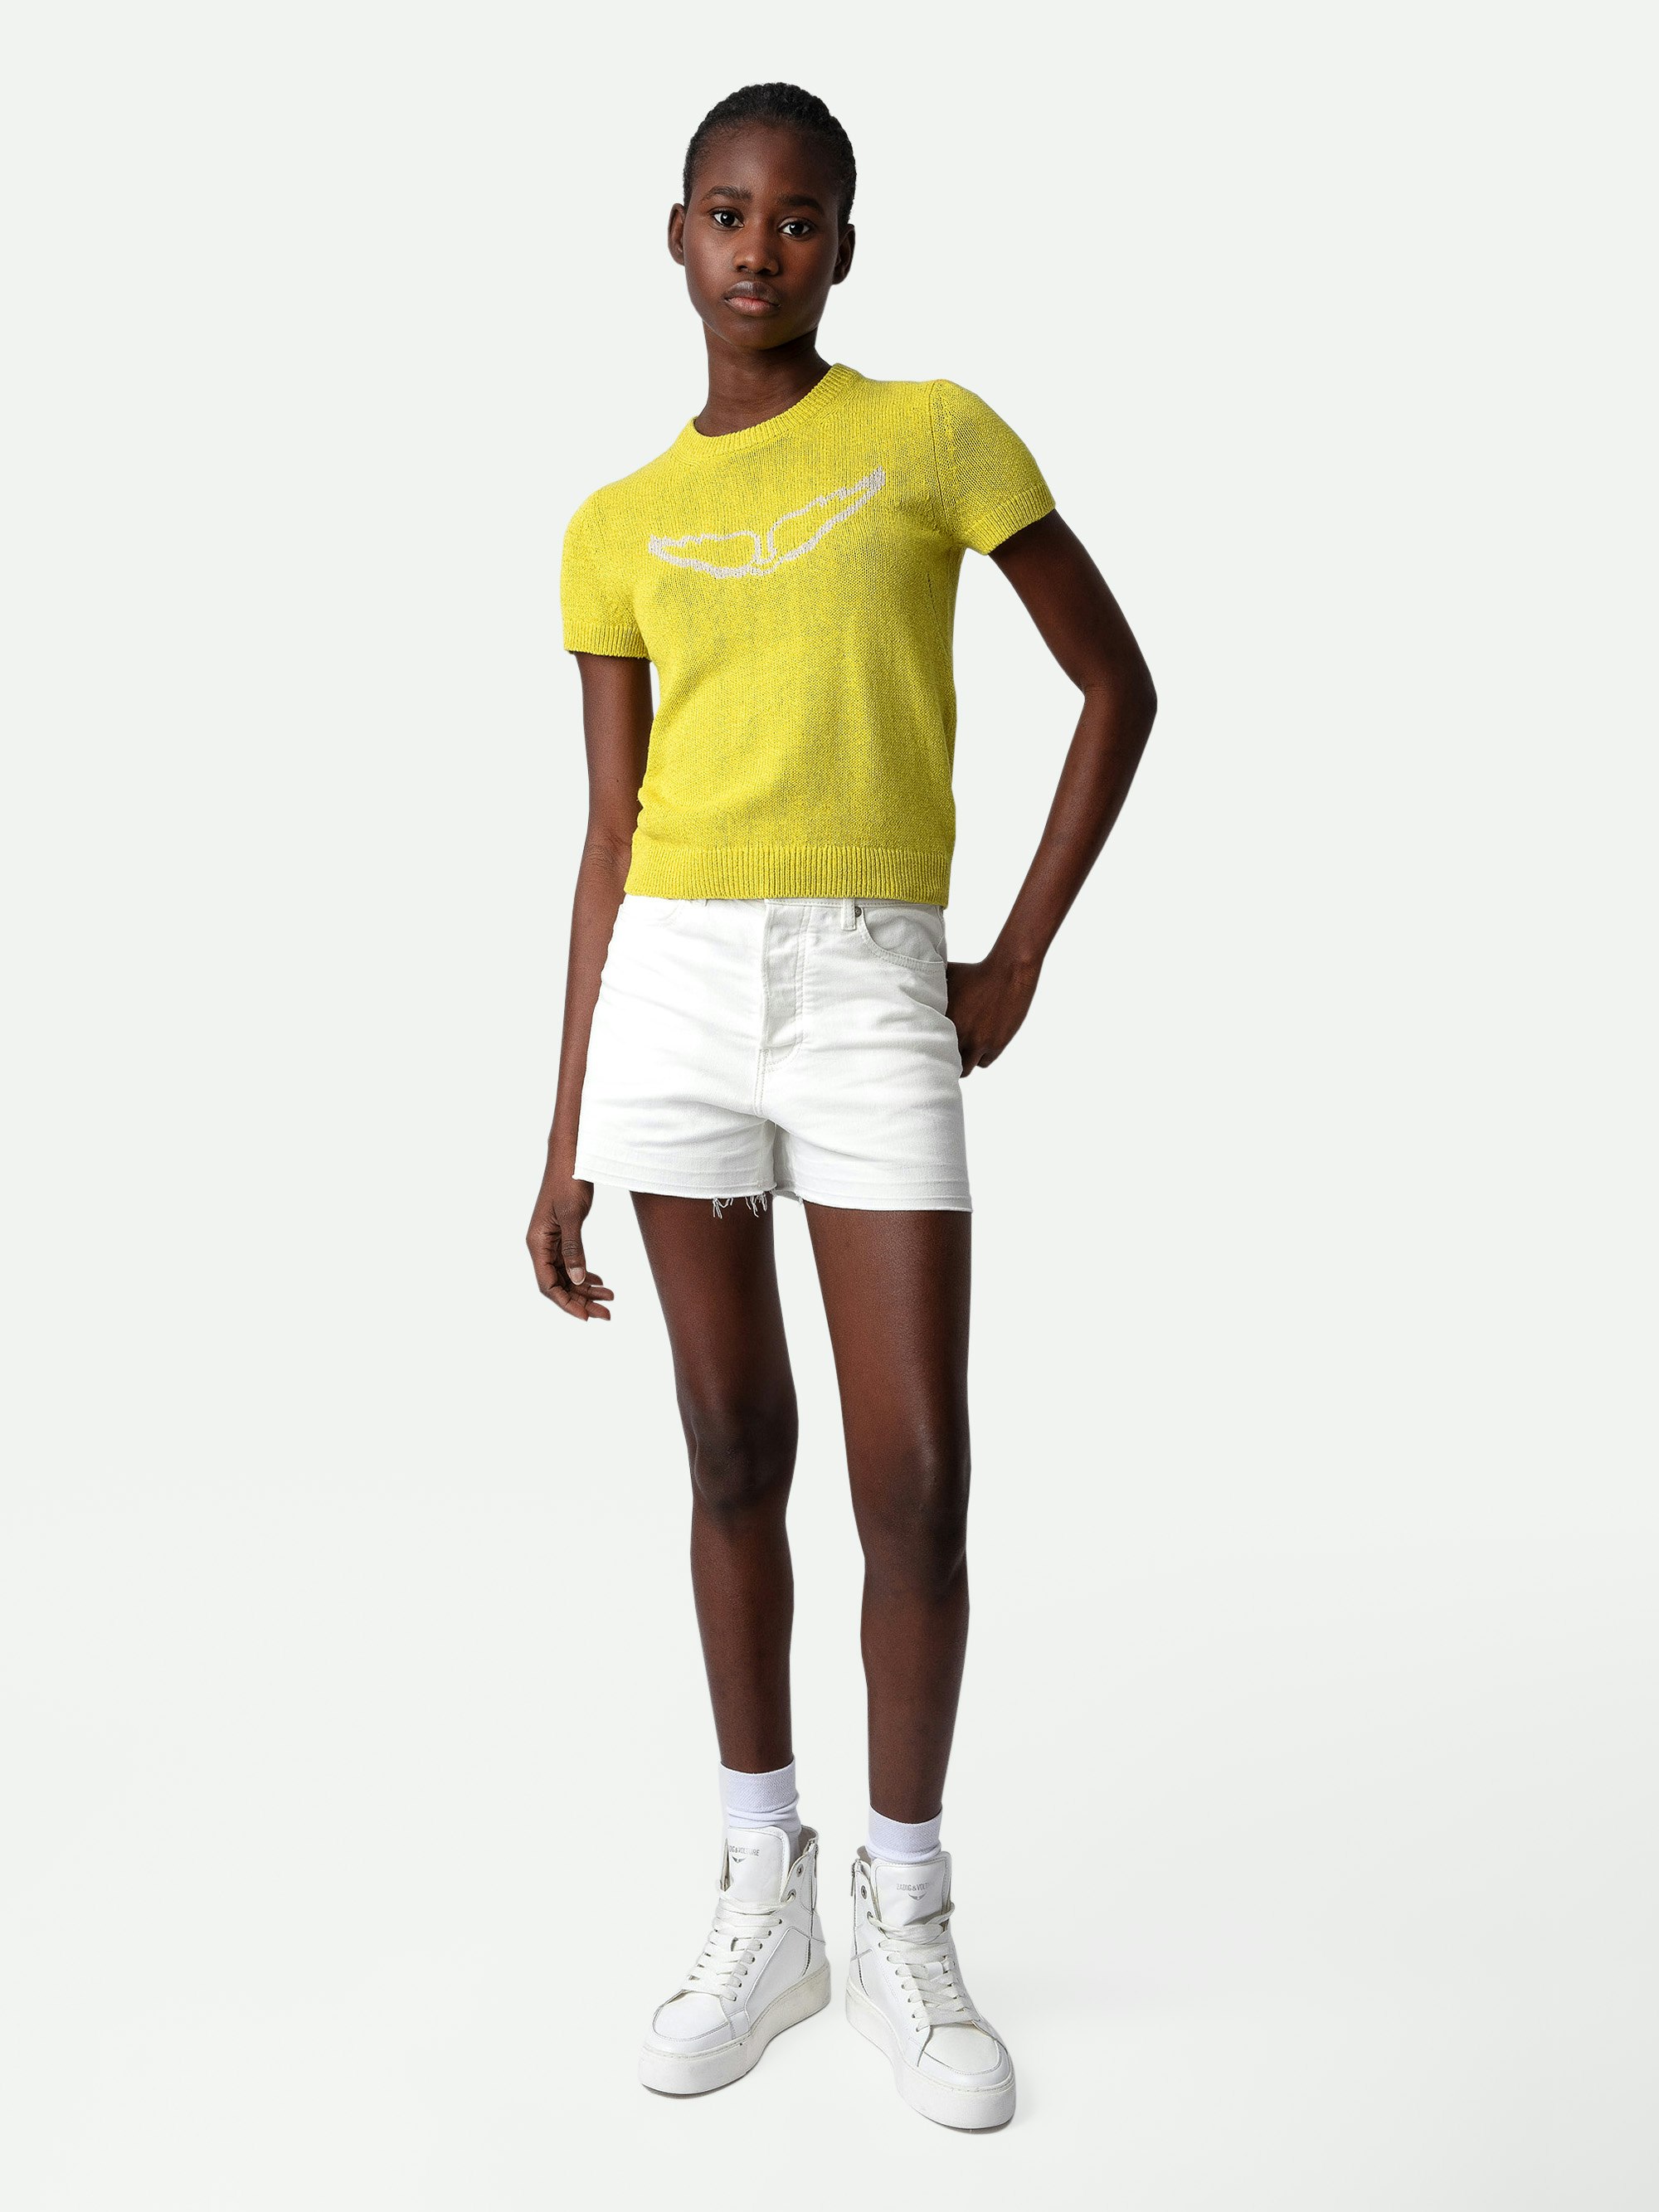 Sorly Wings Jumper - Yellow linen and cotton short-sleeved jumper with intarsia jacquard wings.